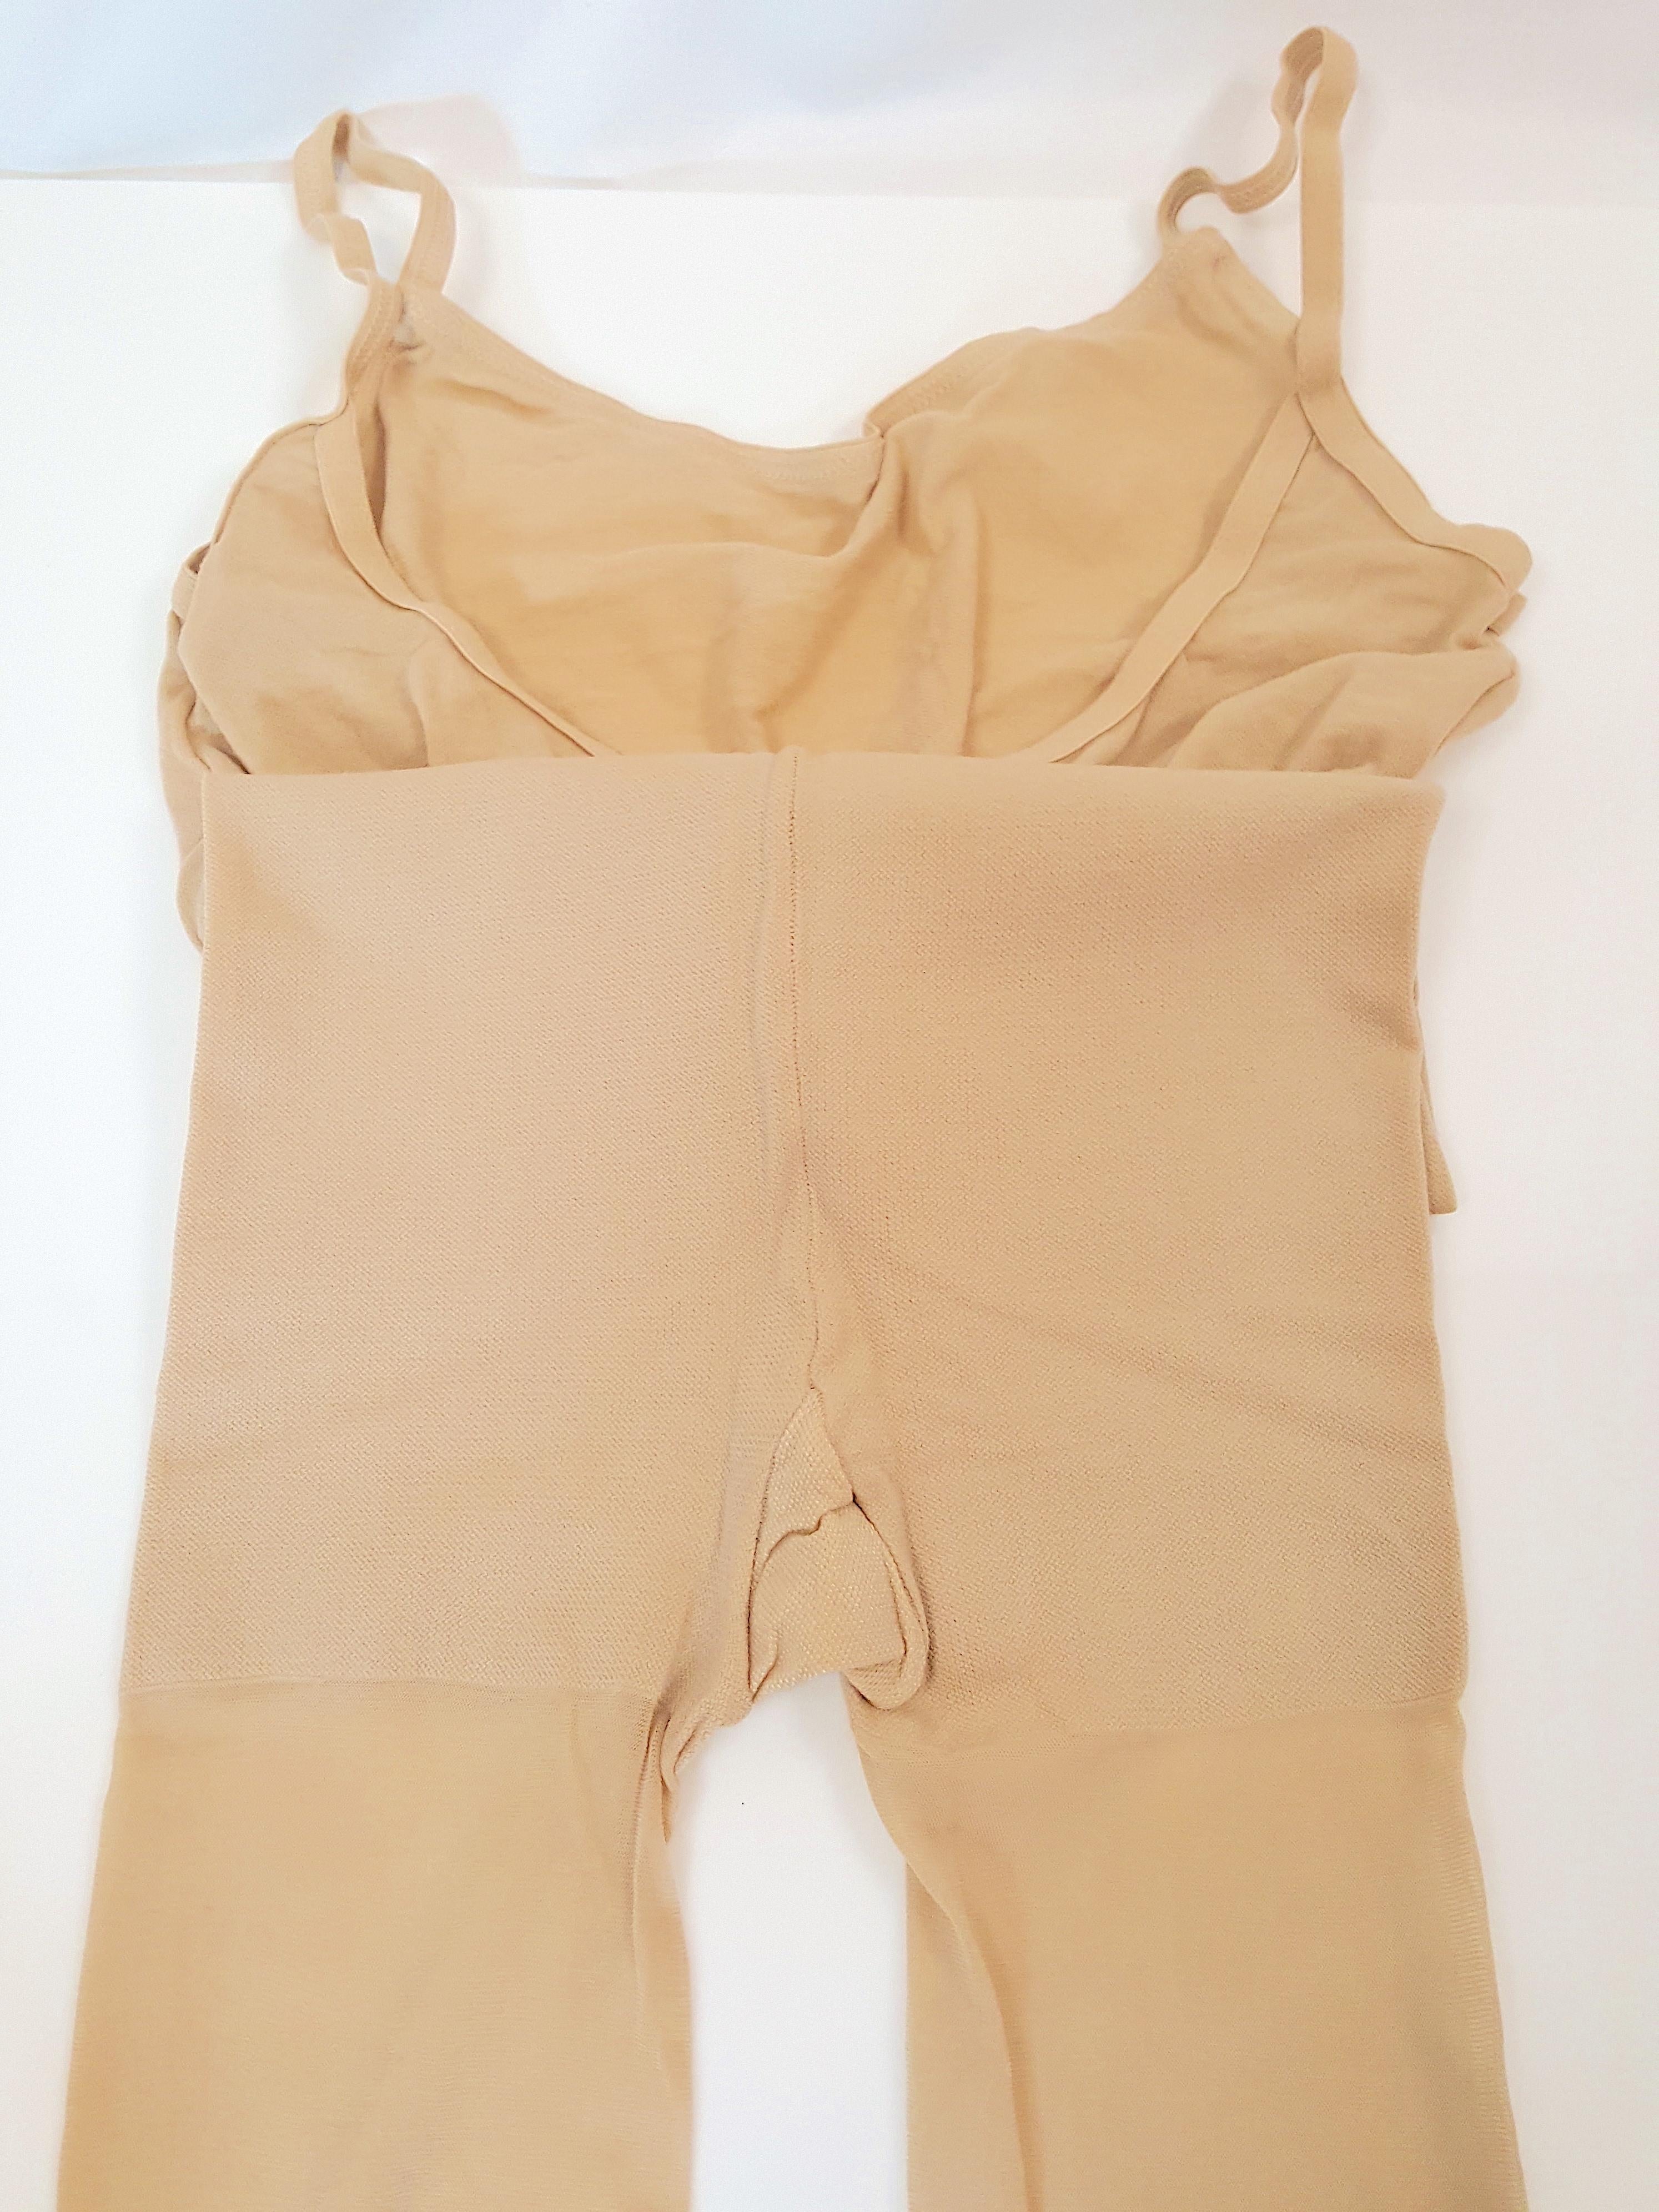 AFVandevorst FirstCollection Lingerie Boxed SheerBodystockingHosieryCatsuit, 1998 2